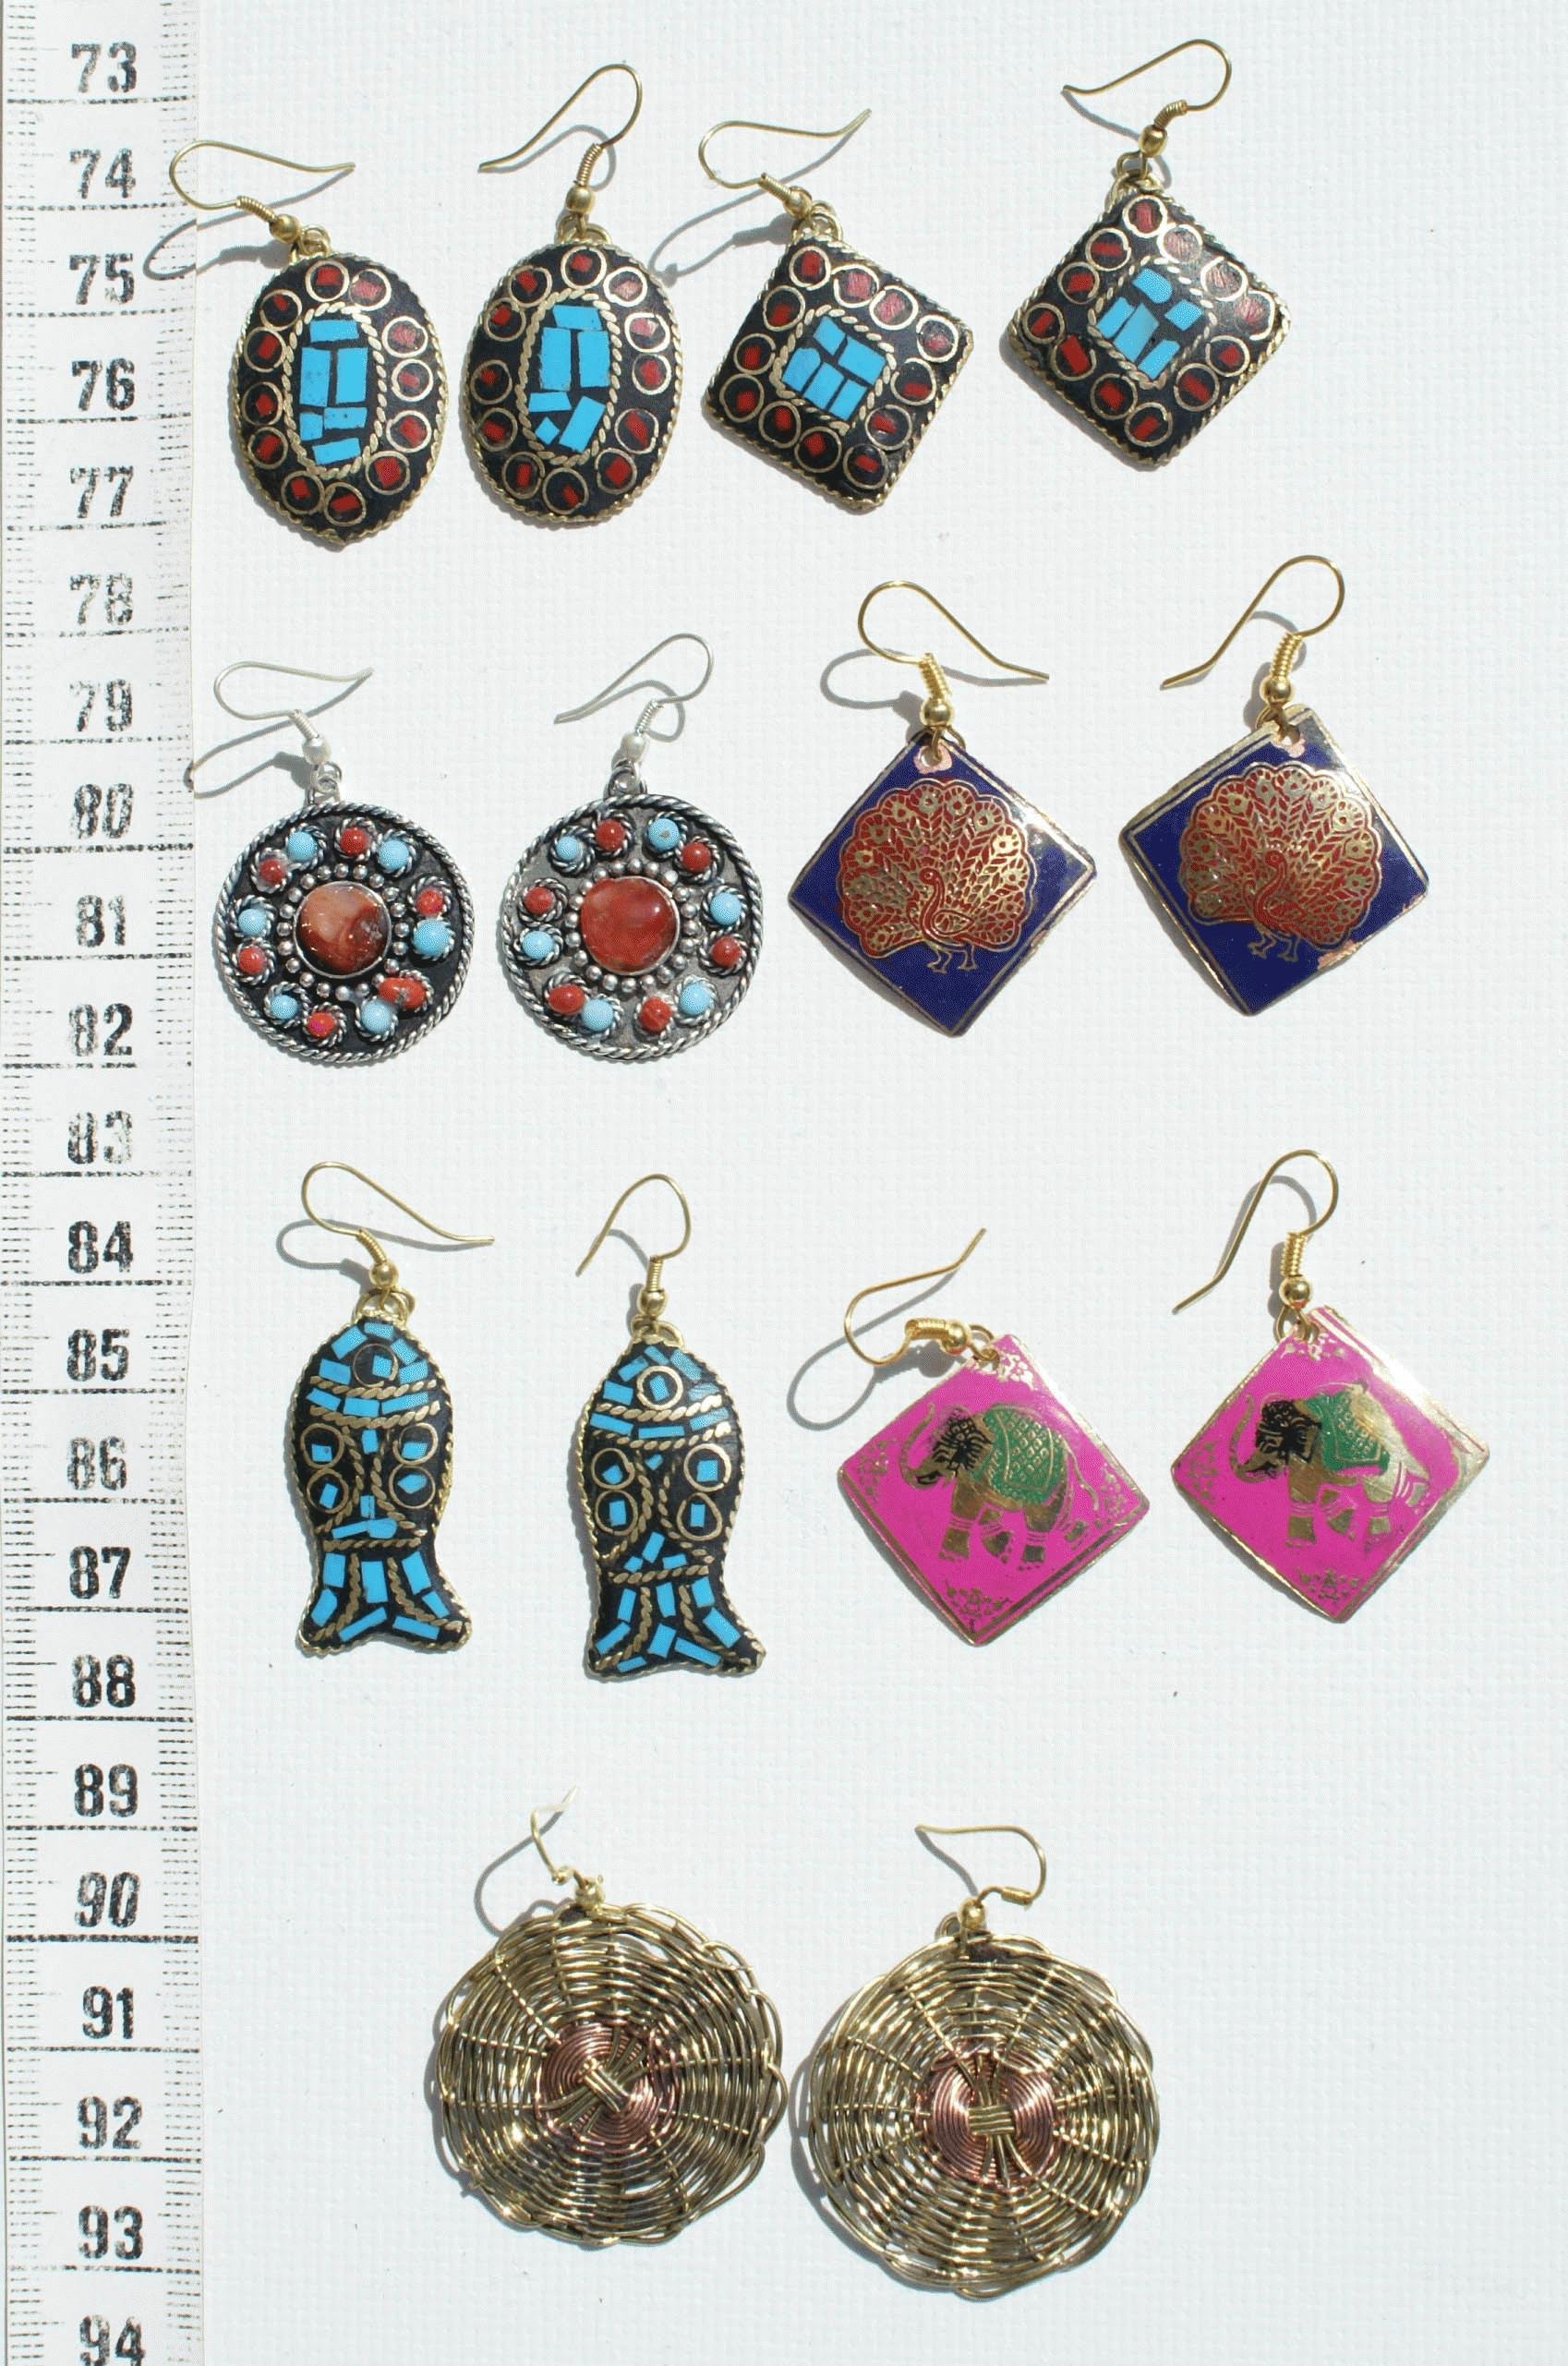 online Wholesale shopping Seed-Beads and silk-thread-Earrings| Alibaba.com